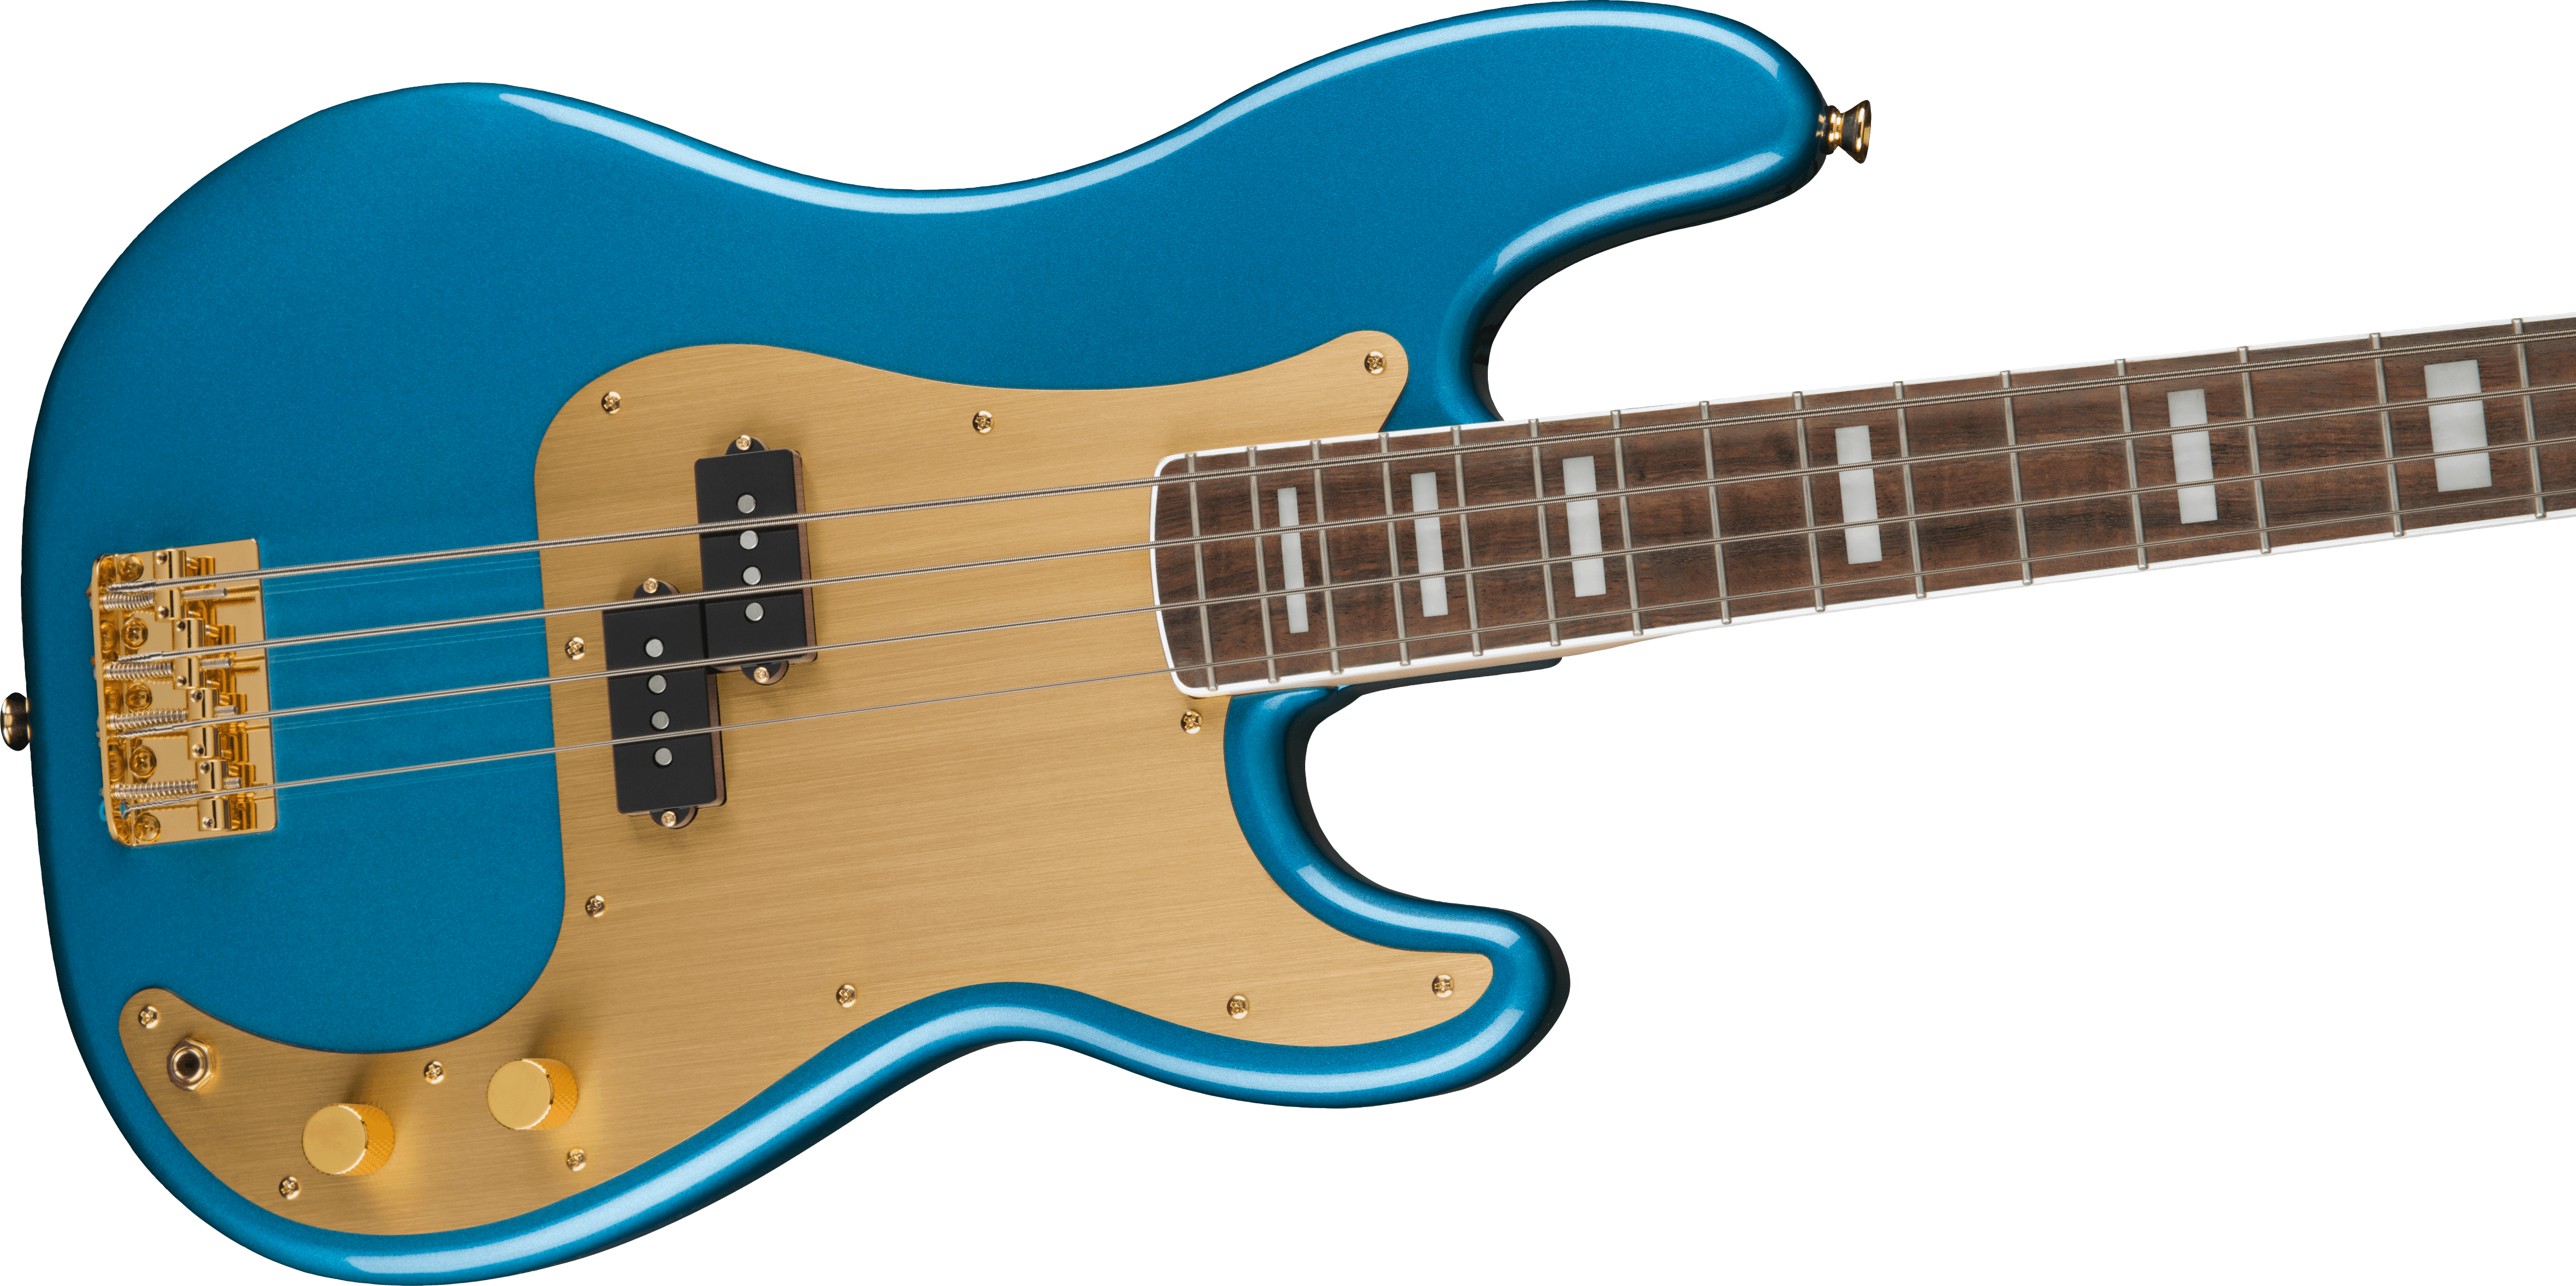 Squier 40th Anniversary Precision Bass®, Gold Edition, Laurel Fingerboard, Gold Anodized Pickguard, Lake Placid Blue